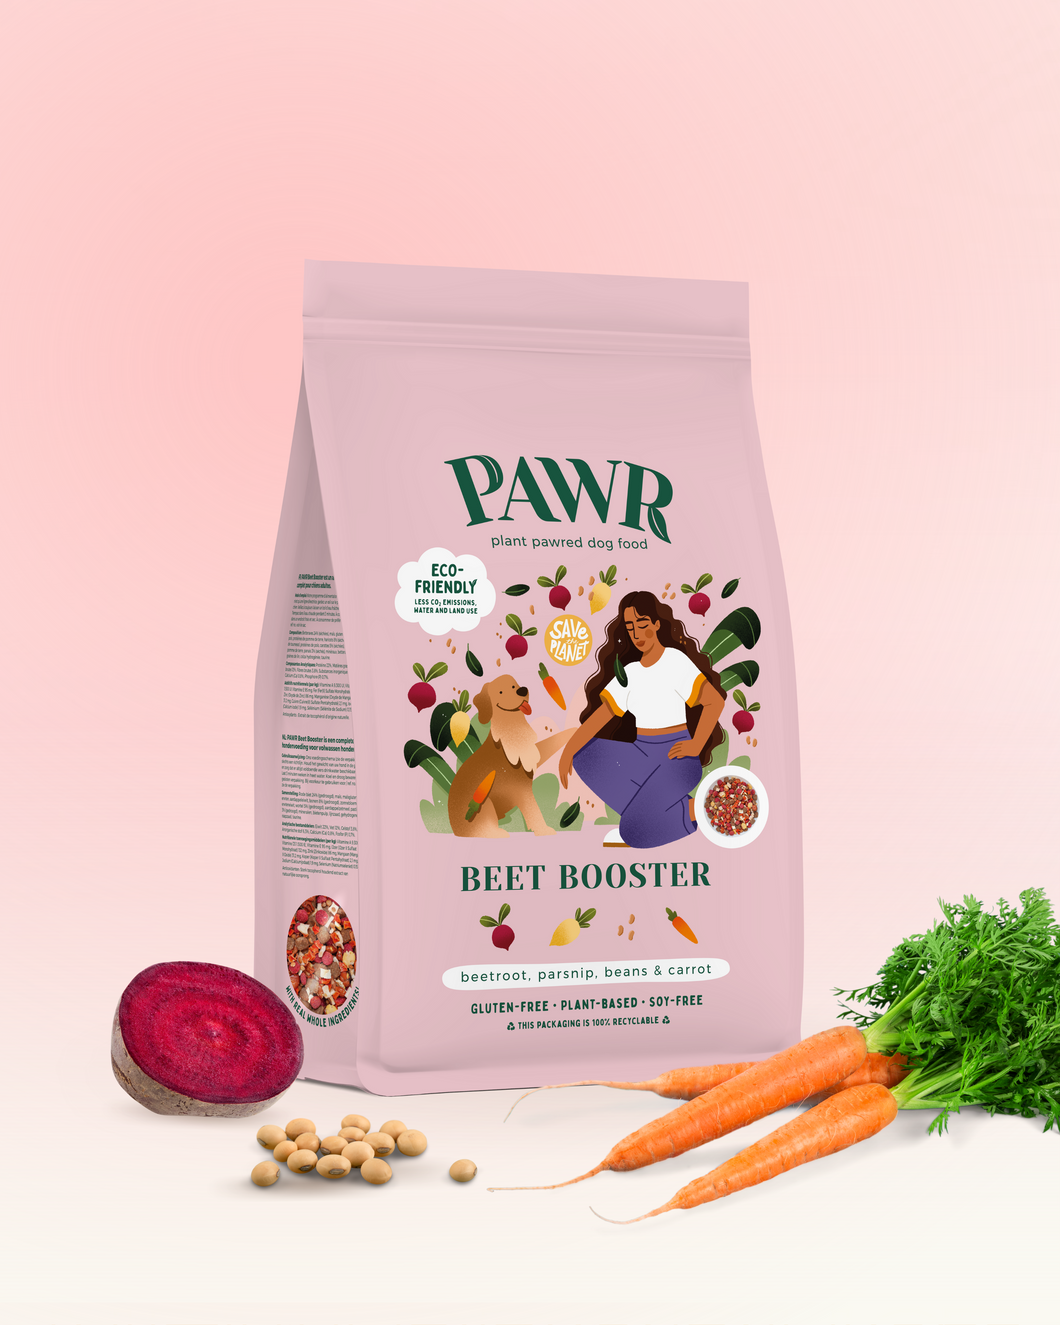 PAWR - VEGETABLE BEET BOOSTER BEETROOT, PARSNIP, BEANS & CARROT